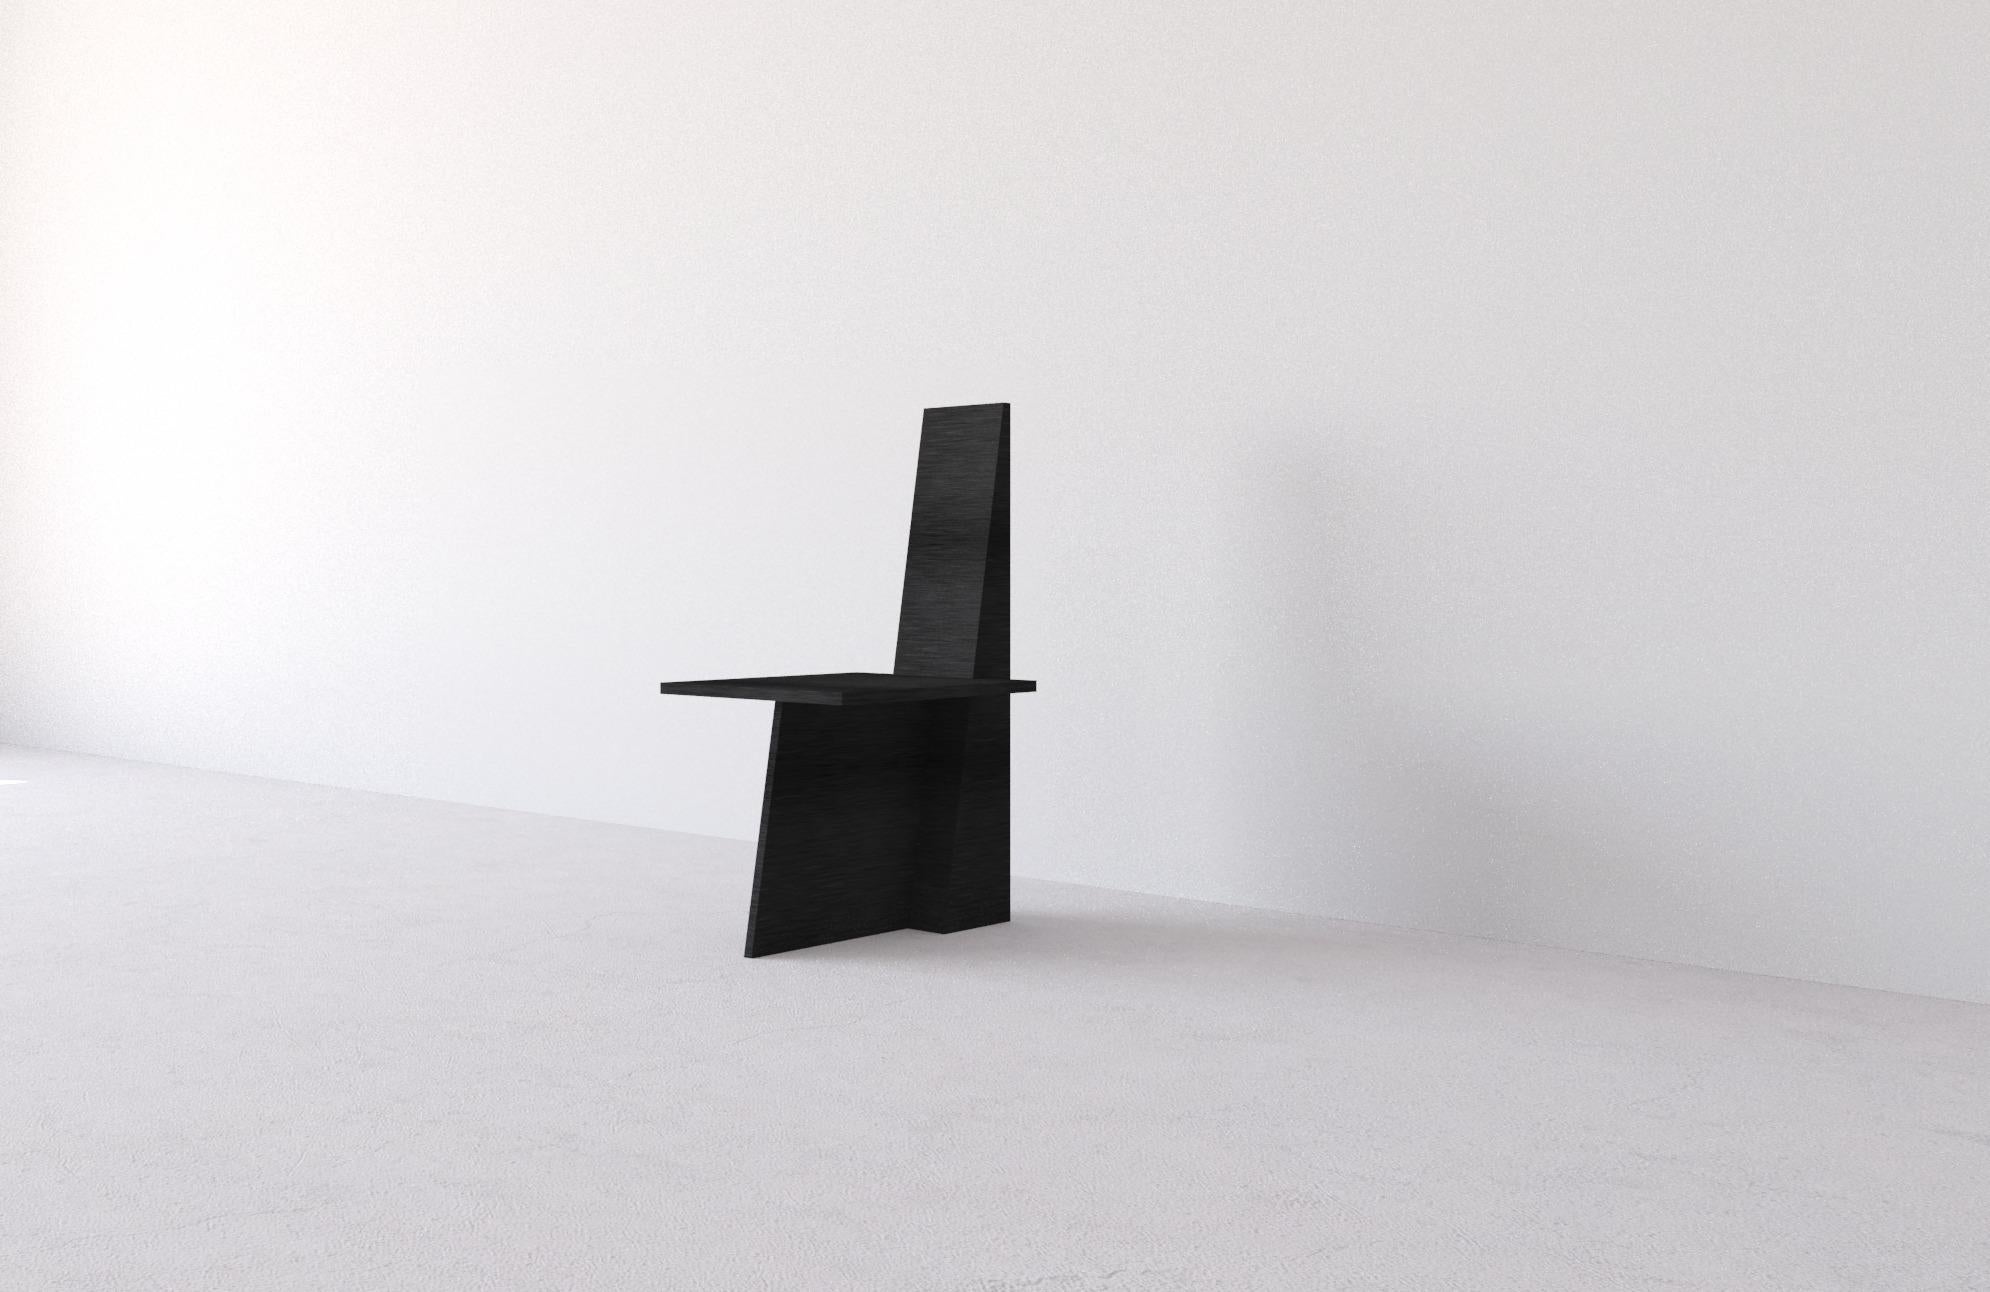 Anchor Chair by Morgane Avéus
Dimensions: D 45 x W 55 x H 95 cm.
Materials: Stained oak.

Anchor chair has a very graphic alure combining sleek lines and strong angles.
It works well on its own as an accent chair and can also easily be multiplied